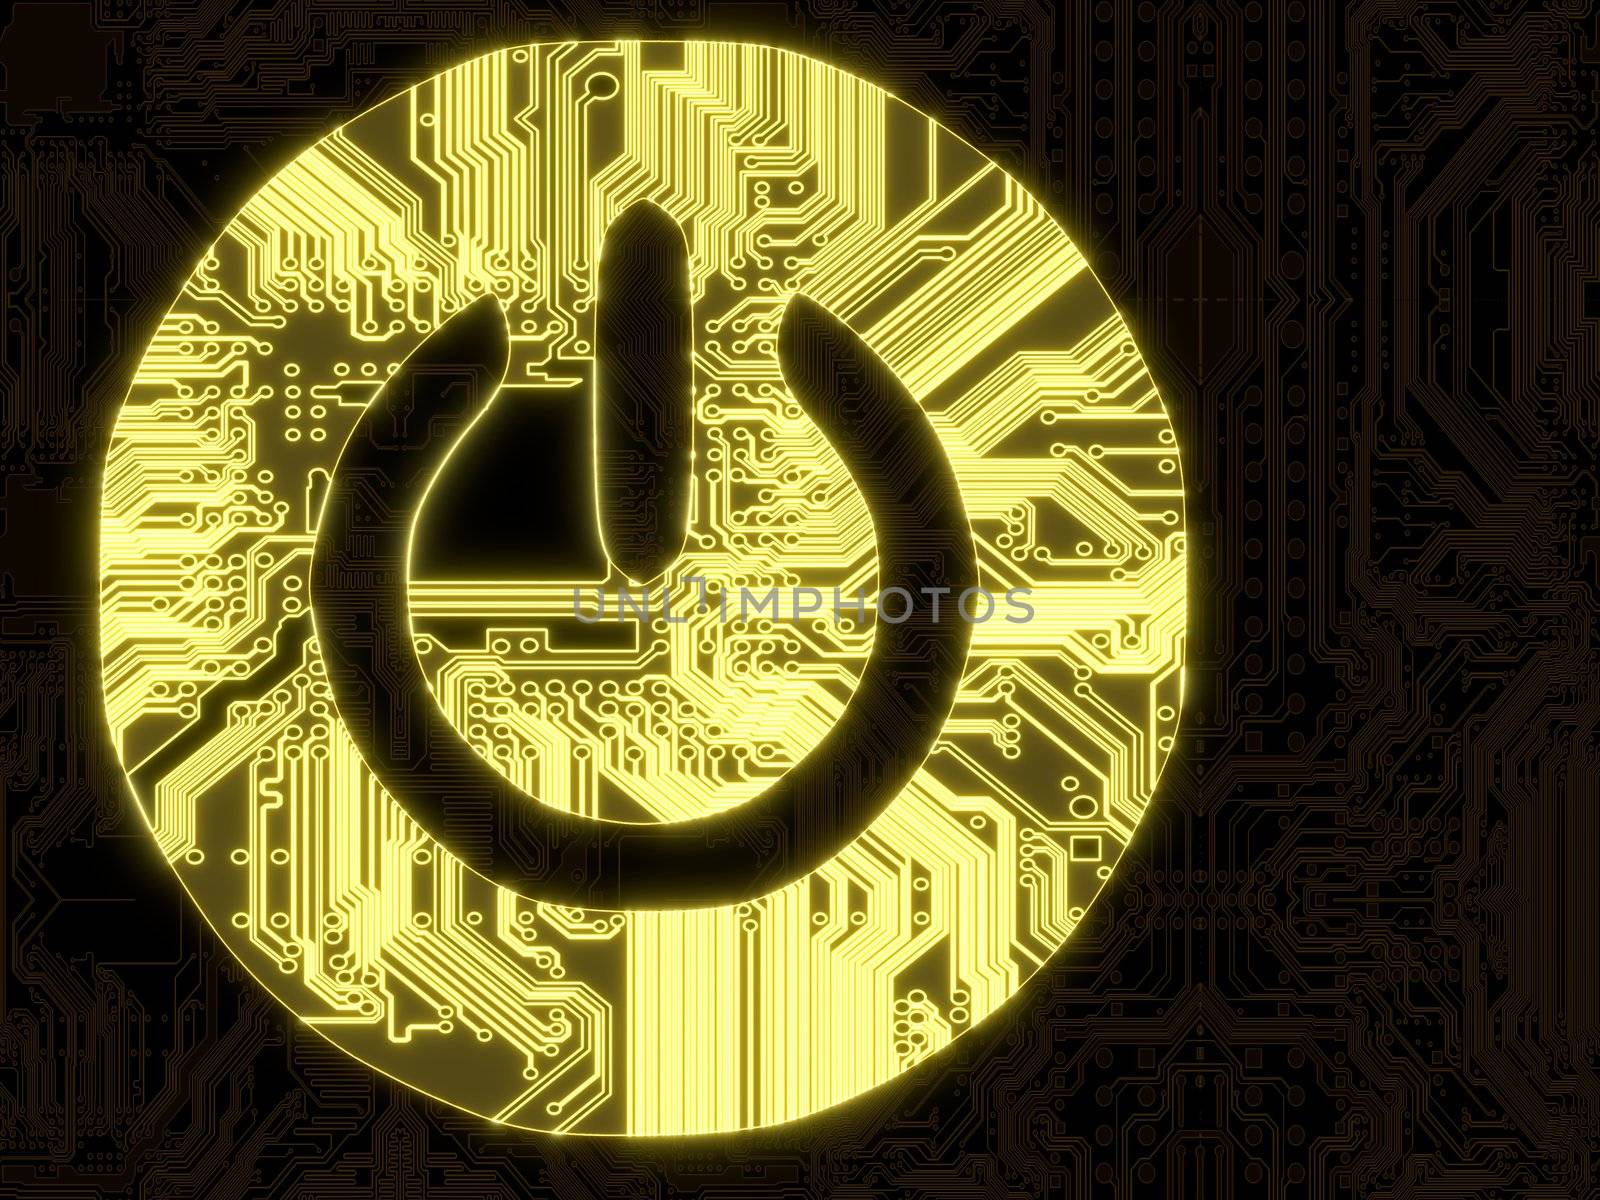 Glowing off on symbol on a computer chip by onirb